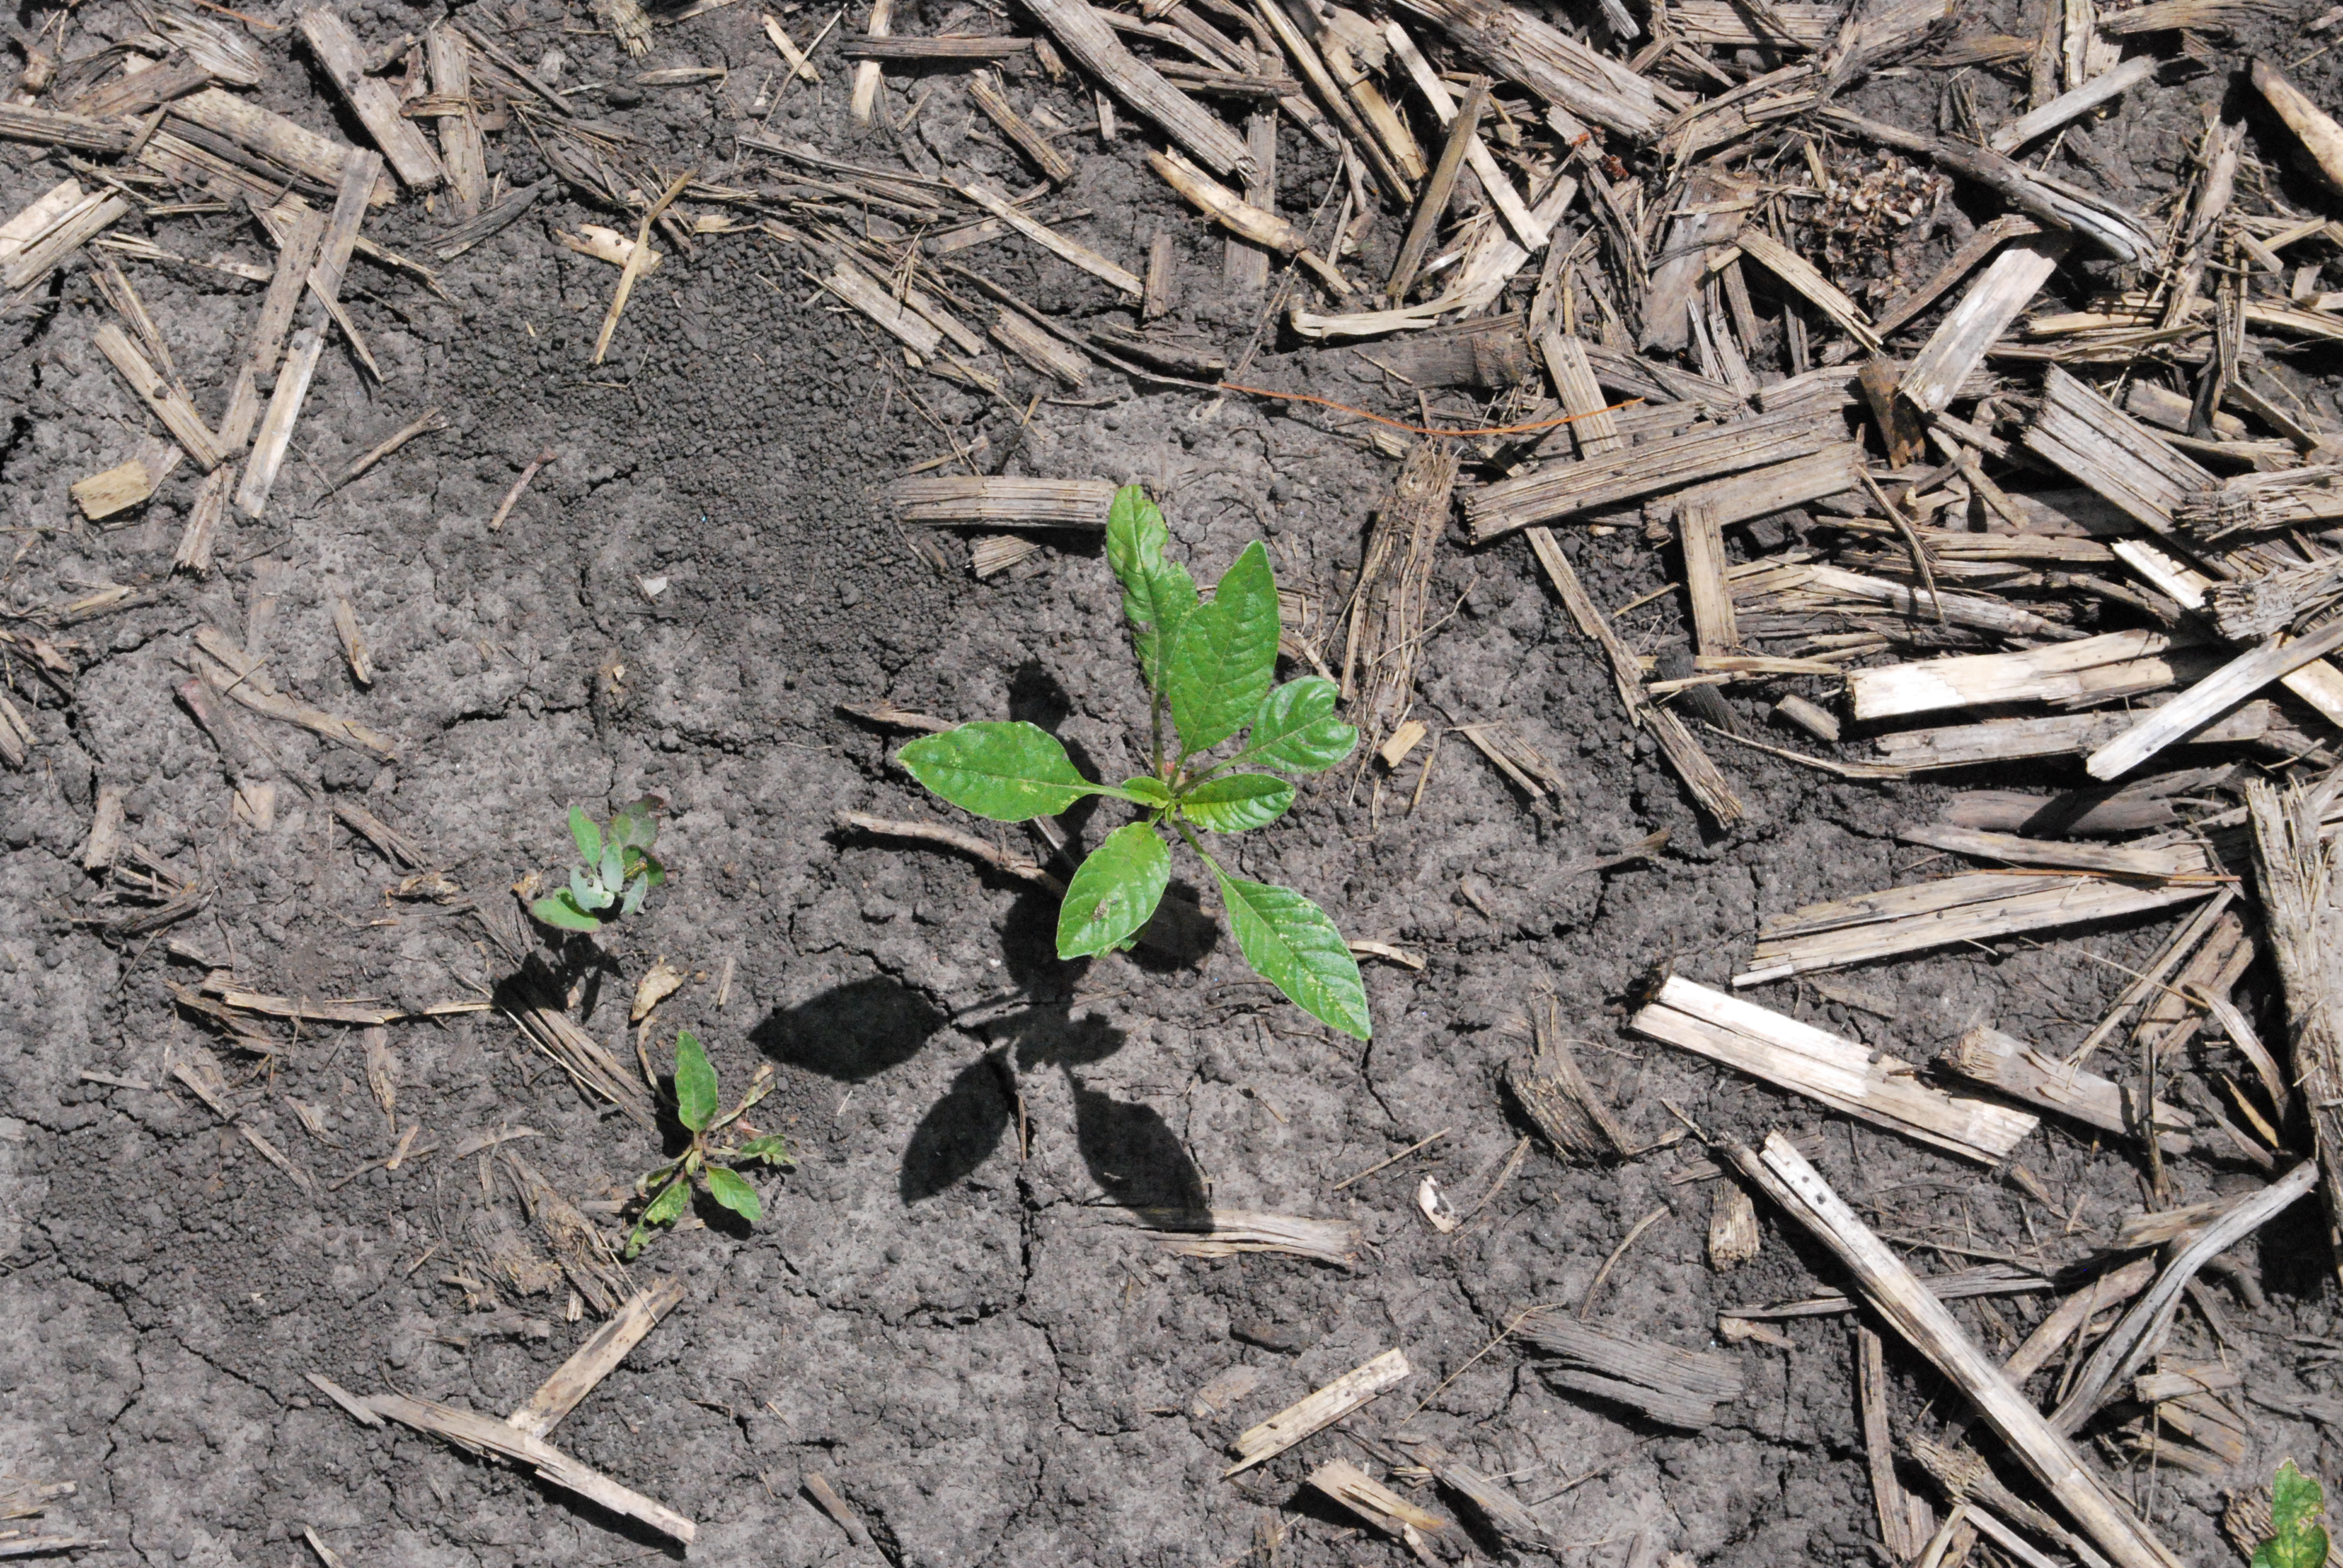 This agronomic photo shows young waterhemp.